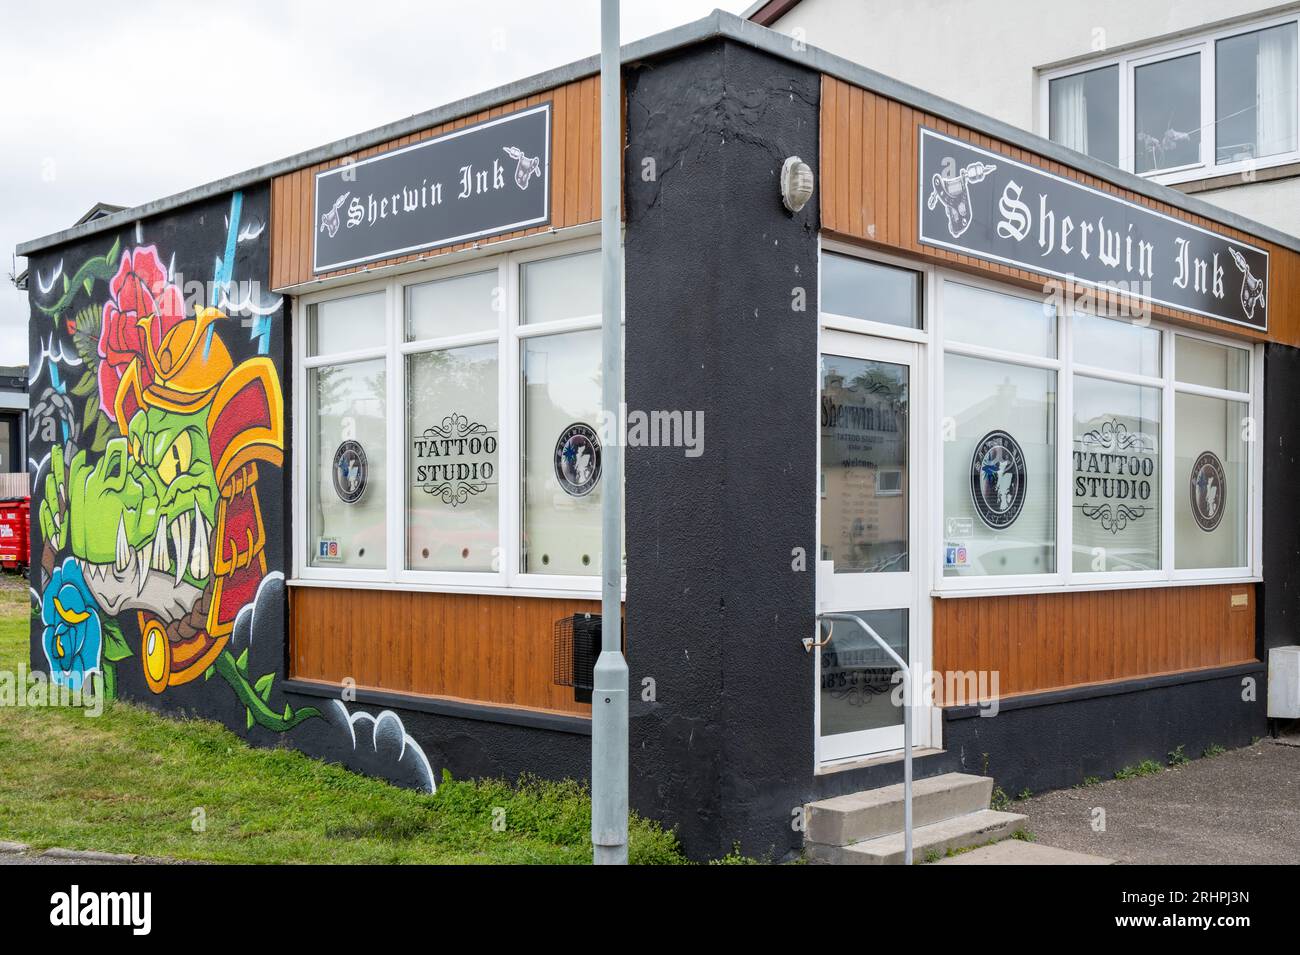 Sherwin Ink, Elgin, Moray, UK. 18th Aug, 2023. This is the Tattoo Studio of Sherwin Ink operated by Sam Sherwin which has just had a Rabbgraffiti treatement to bring colour to the studio. Credit: JASPERIMAGE/Alamy Live News Stock Photo